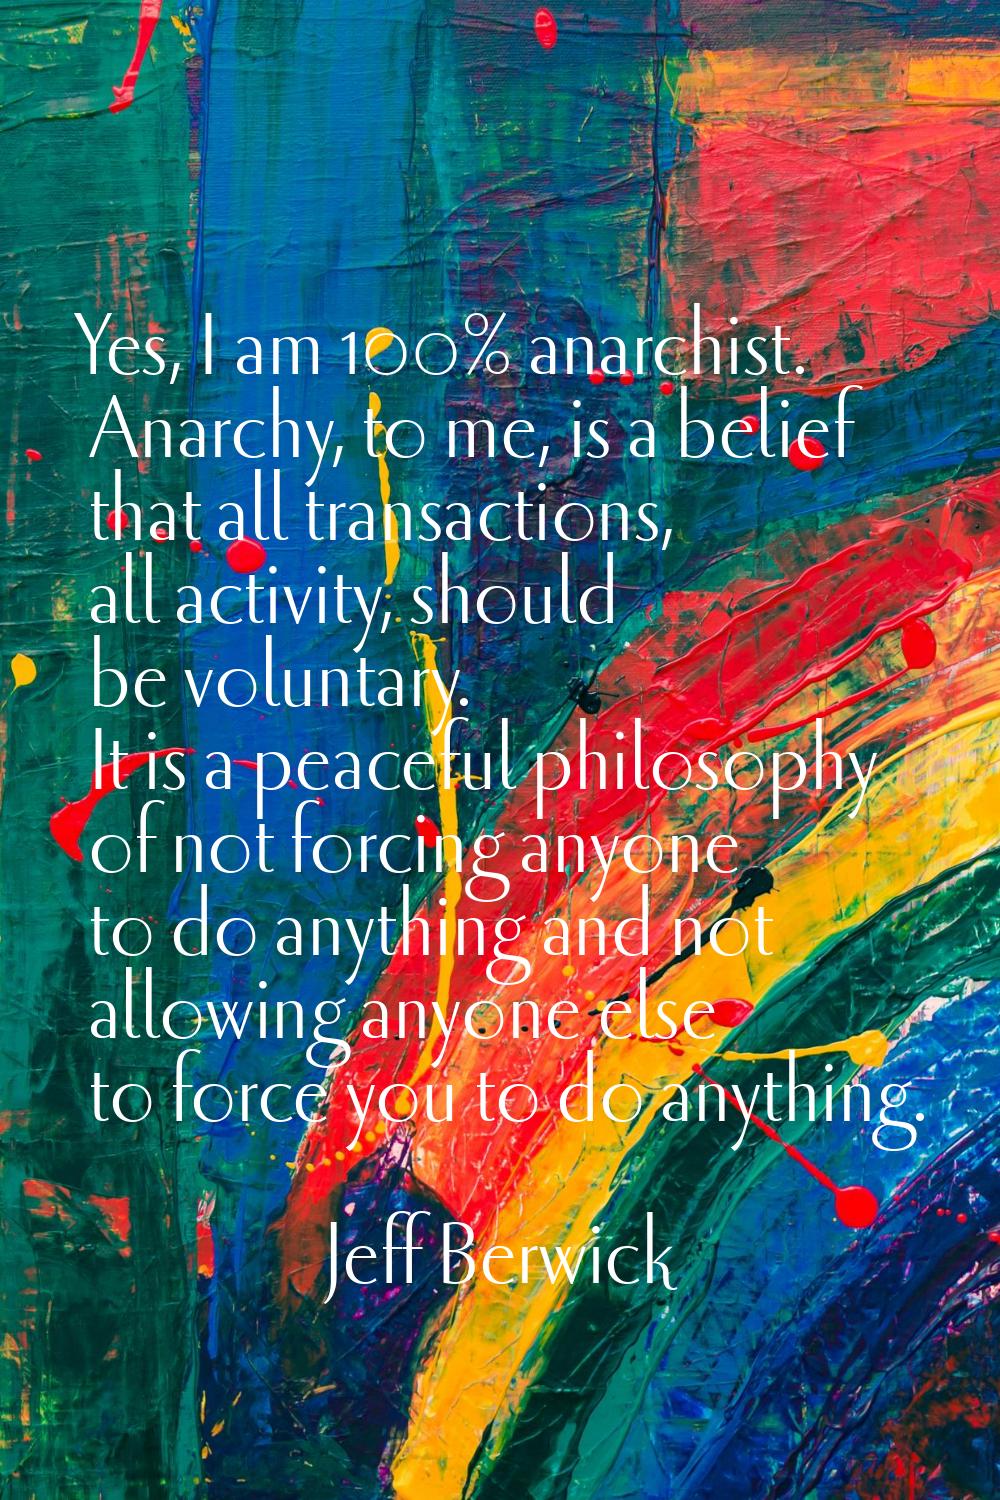 Yes, I am 100% anarchist. Anarchy, to me, is a belief that all transactions, all activity, should b